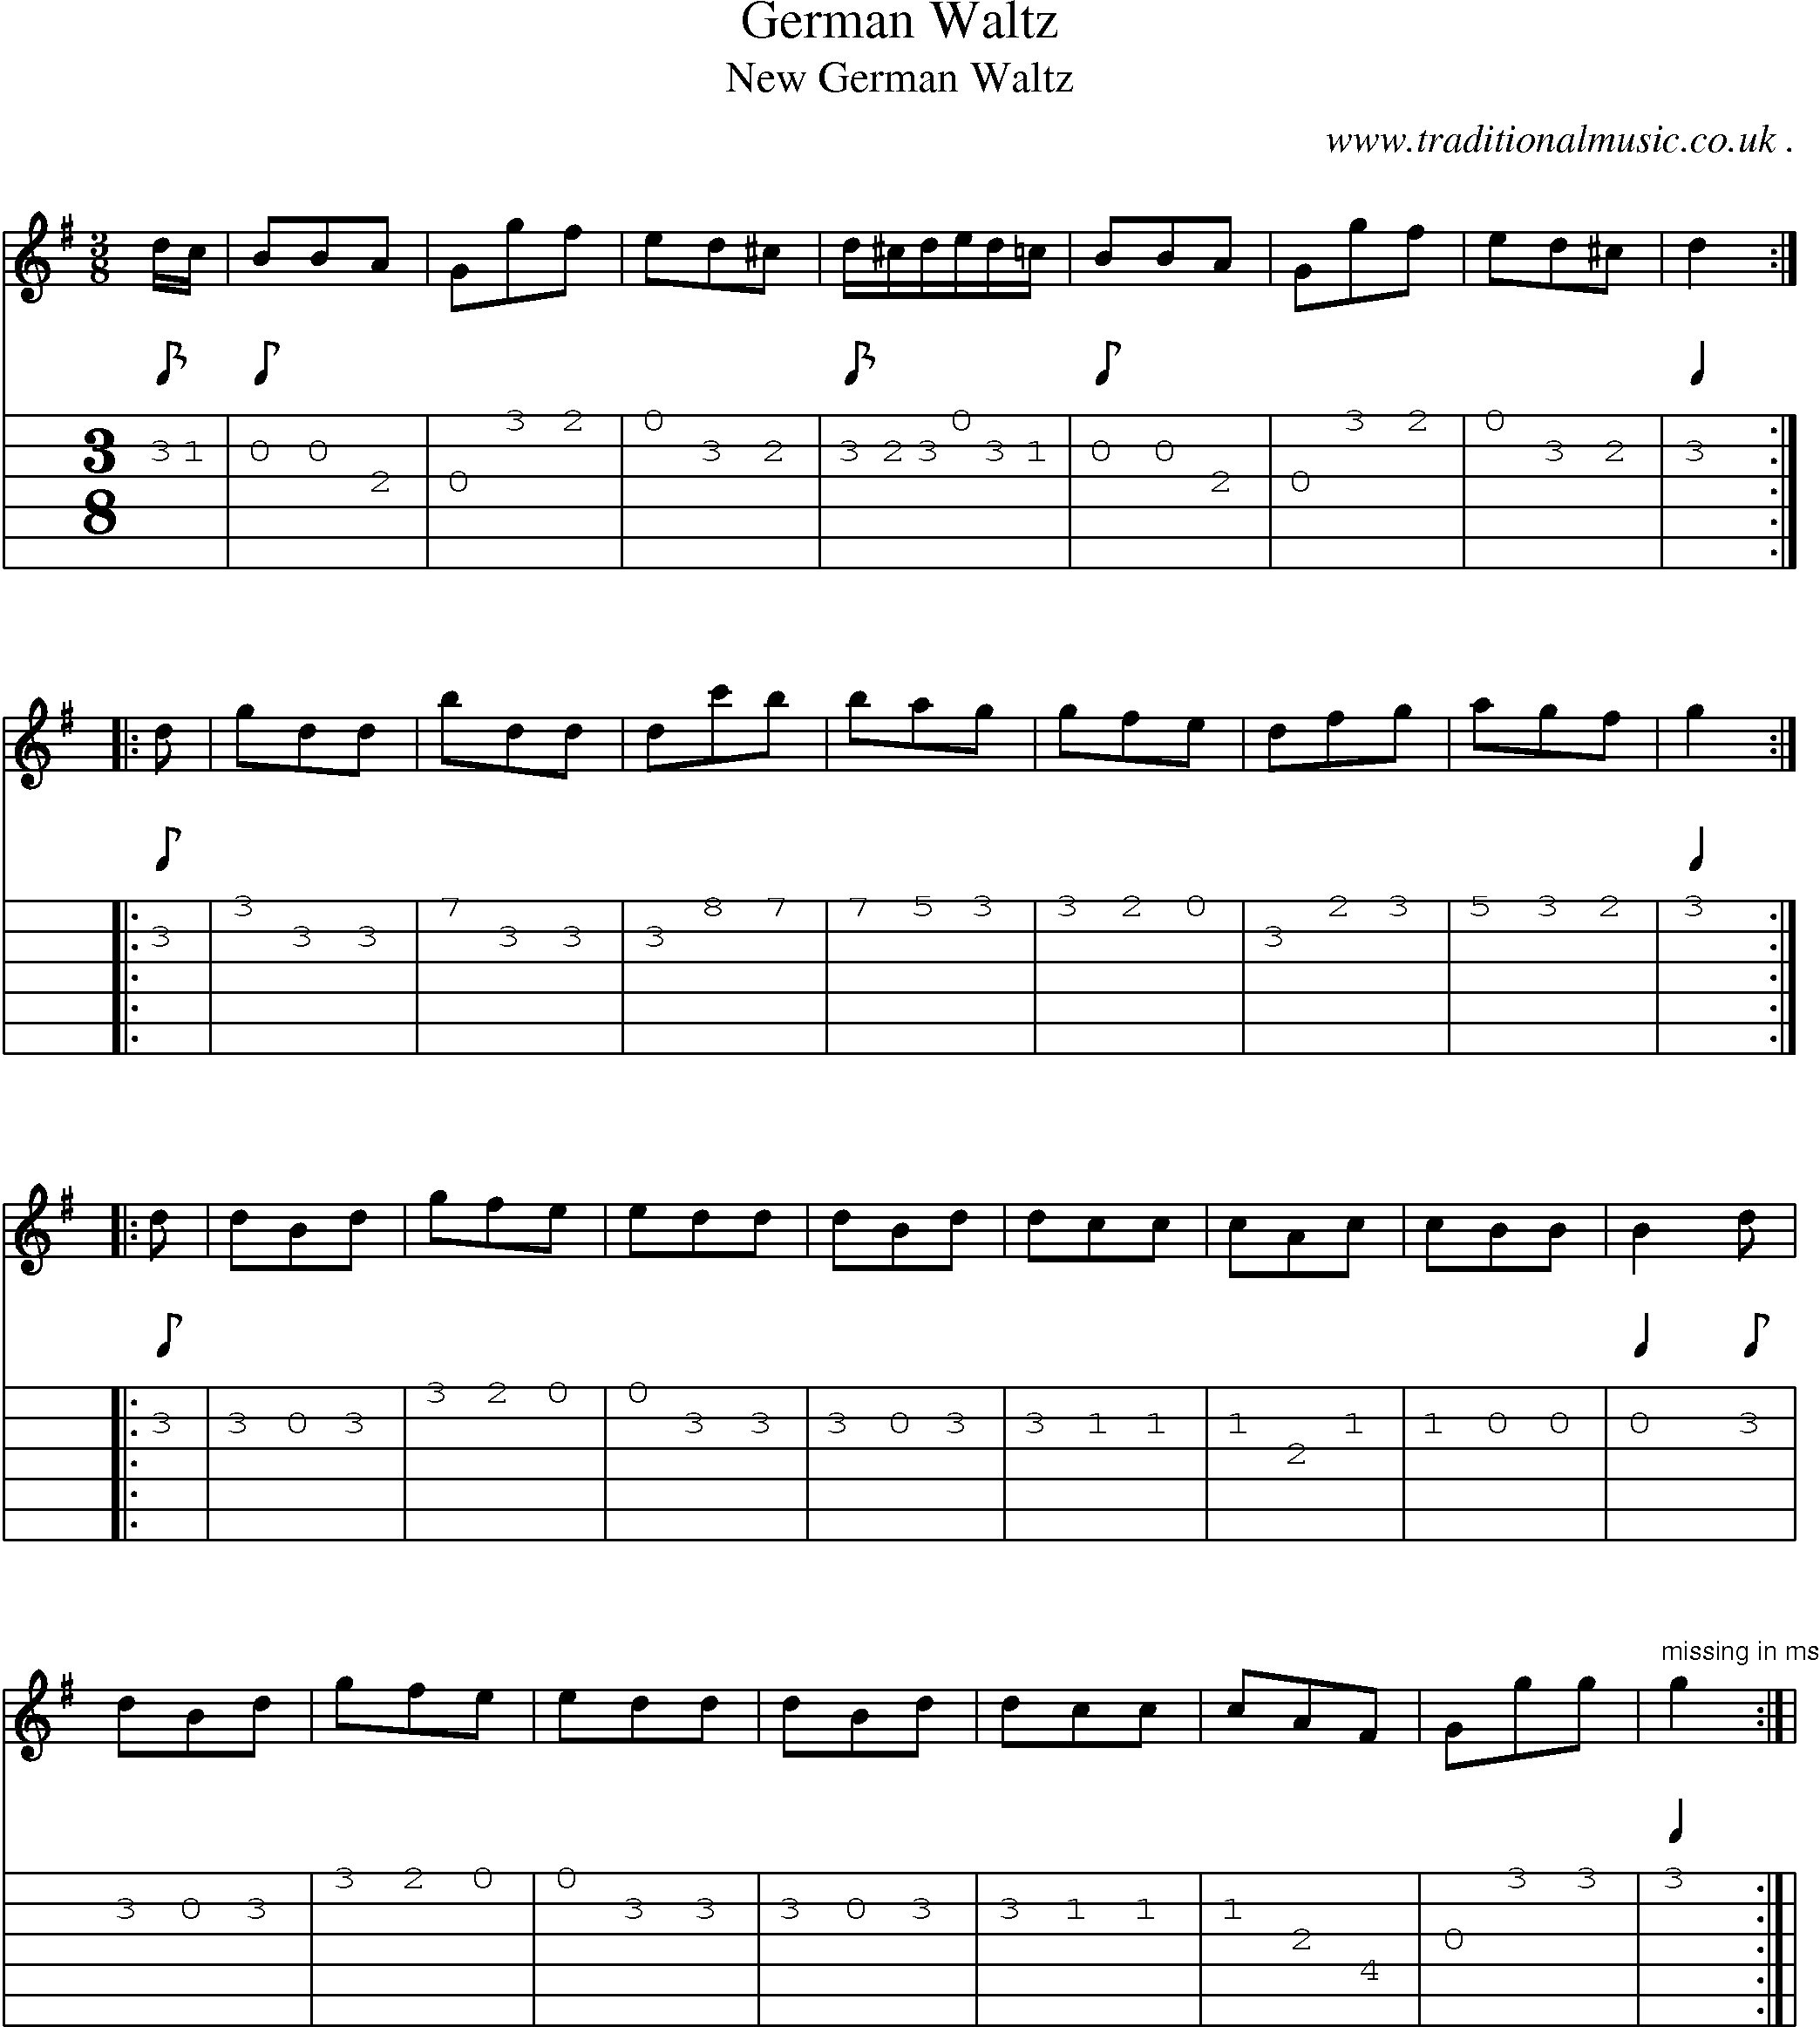 Sheet-Music and Guitar Tabs for German Waltz